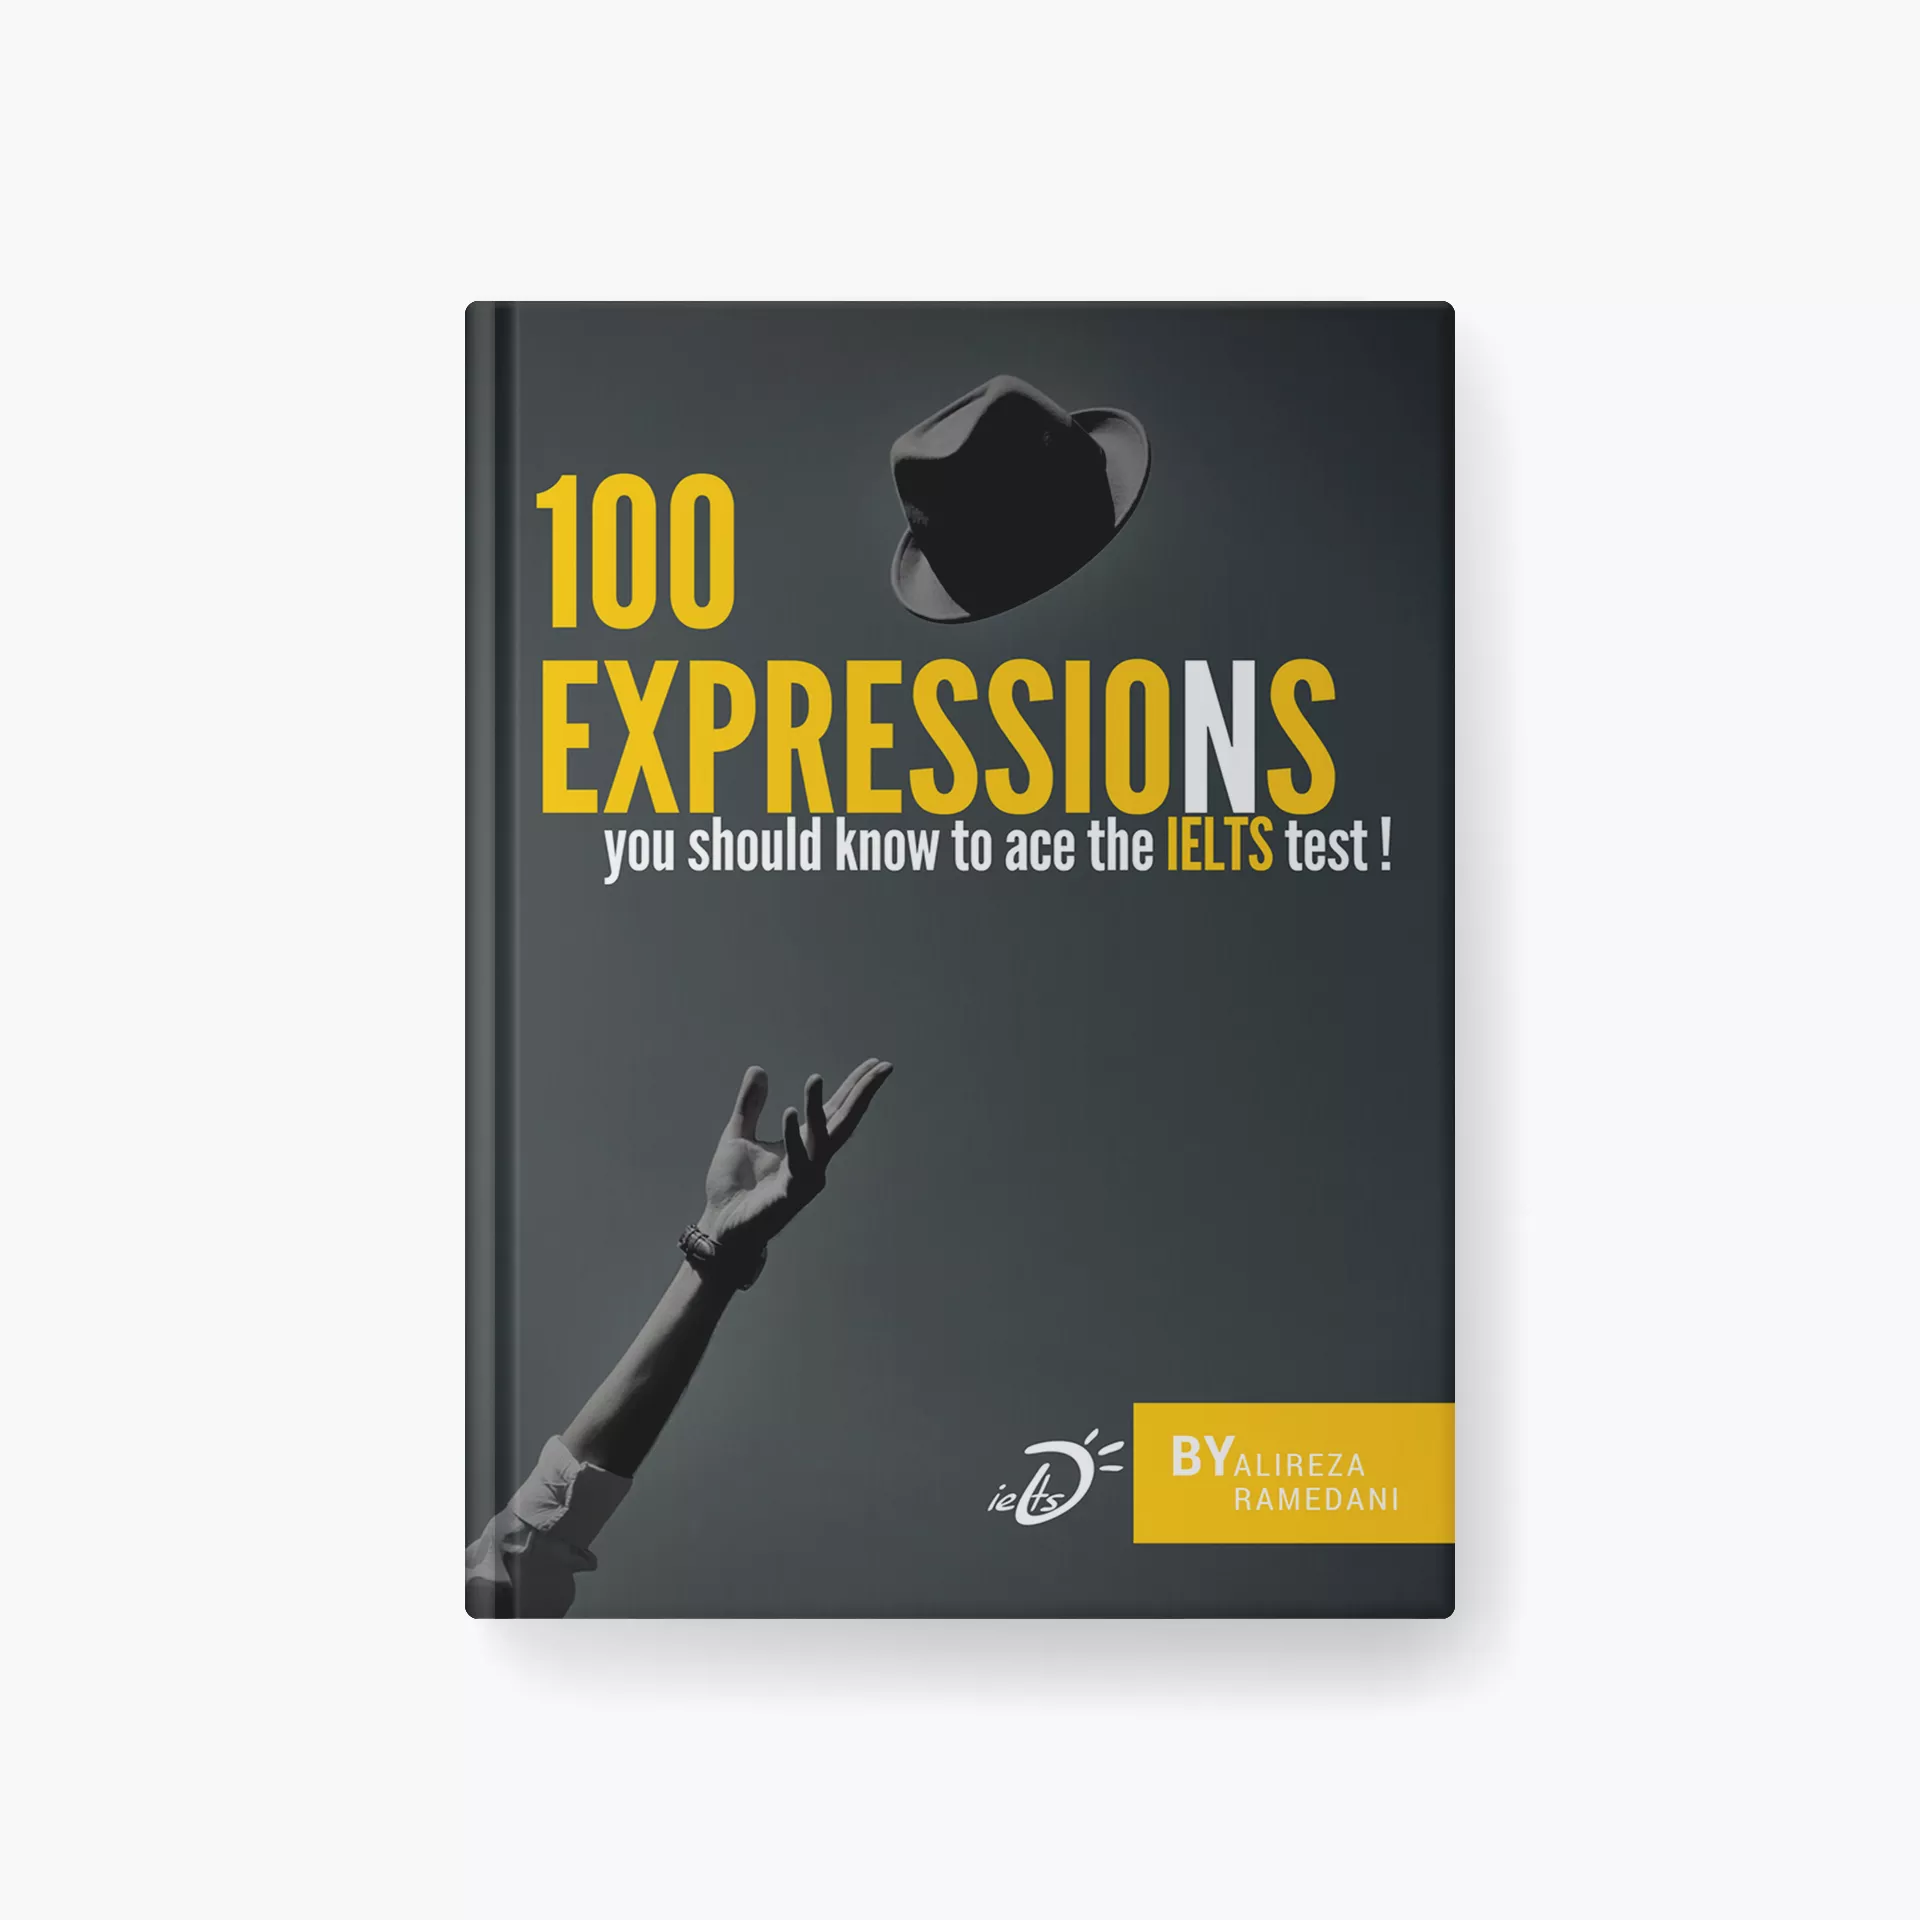 100 Expressions you should know to ace the IELTS test